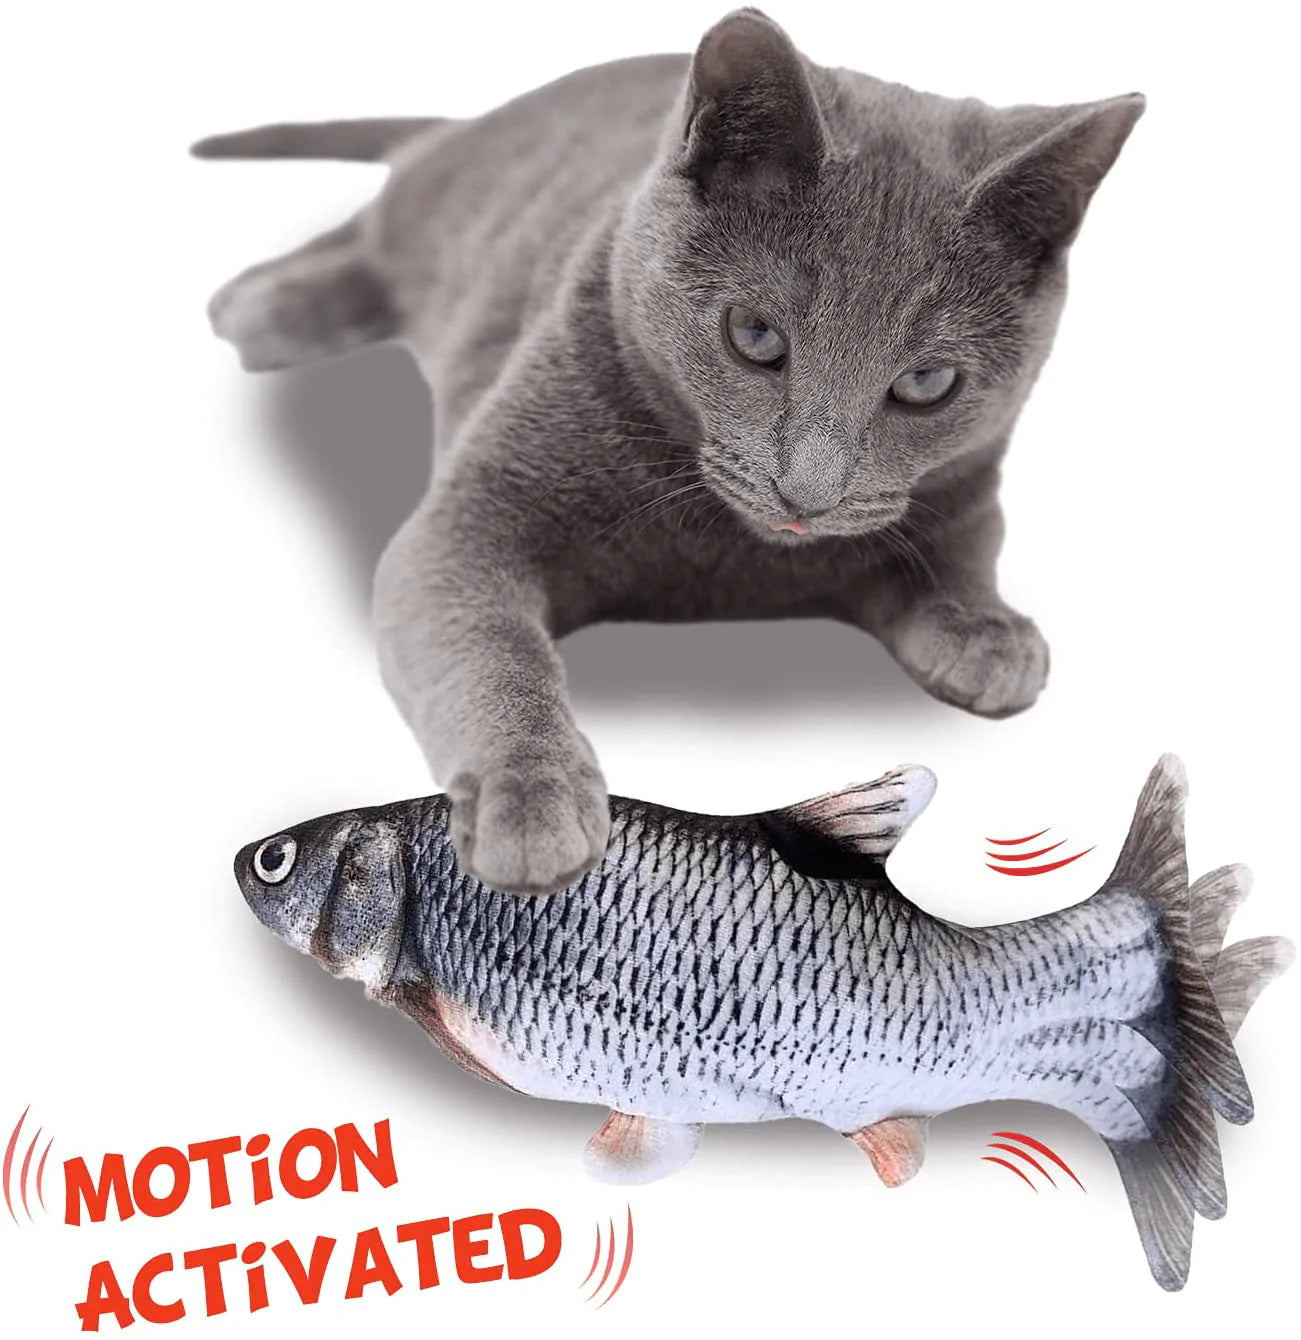 ZIKATON Flopping Fish Cat Toy 11",Electric Moving Fish Cat Toy, Motion Kitten Toy,Realistic Floppy Cat Kicker Fish Toy, Vibrating Catnip Fish Toy,Different Fish for Choice & Fun Toy for Cat Exercise Animals & Pet Supplies > Pet Supplies > Cat Supplies > Cat Toys ZIKATON   